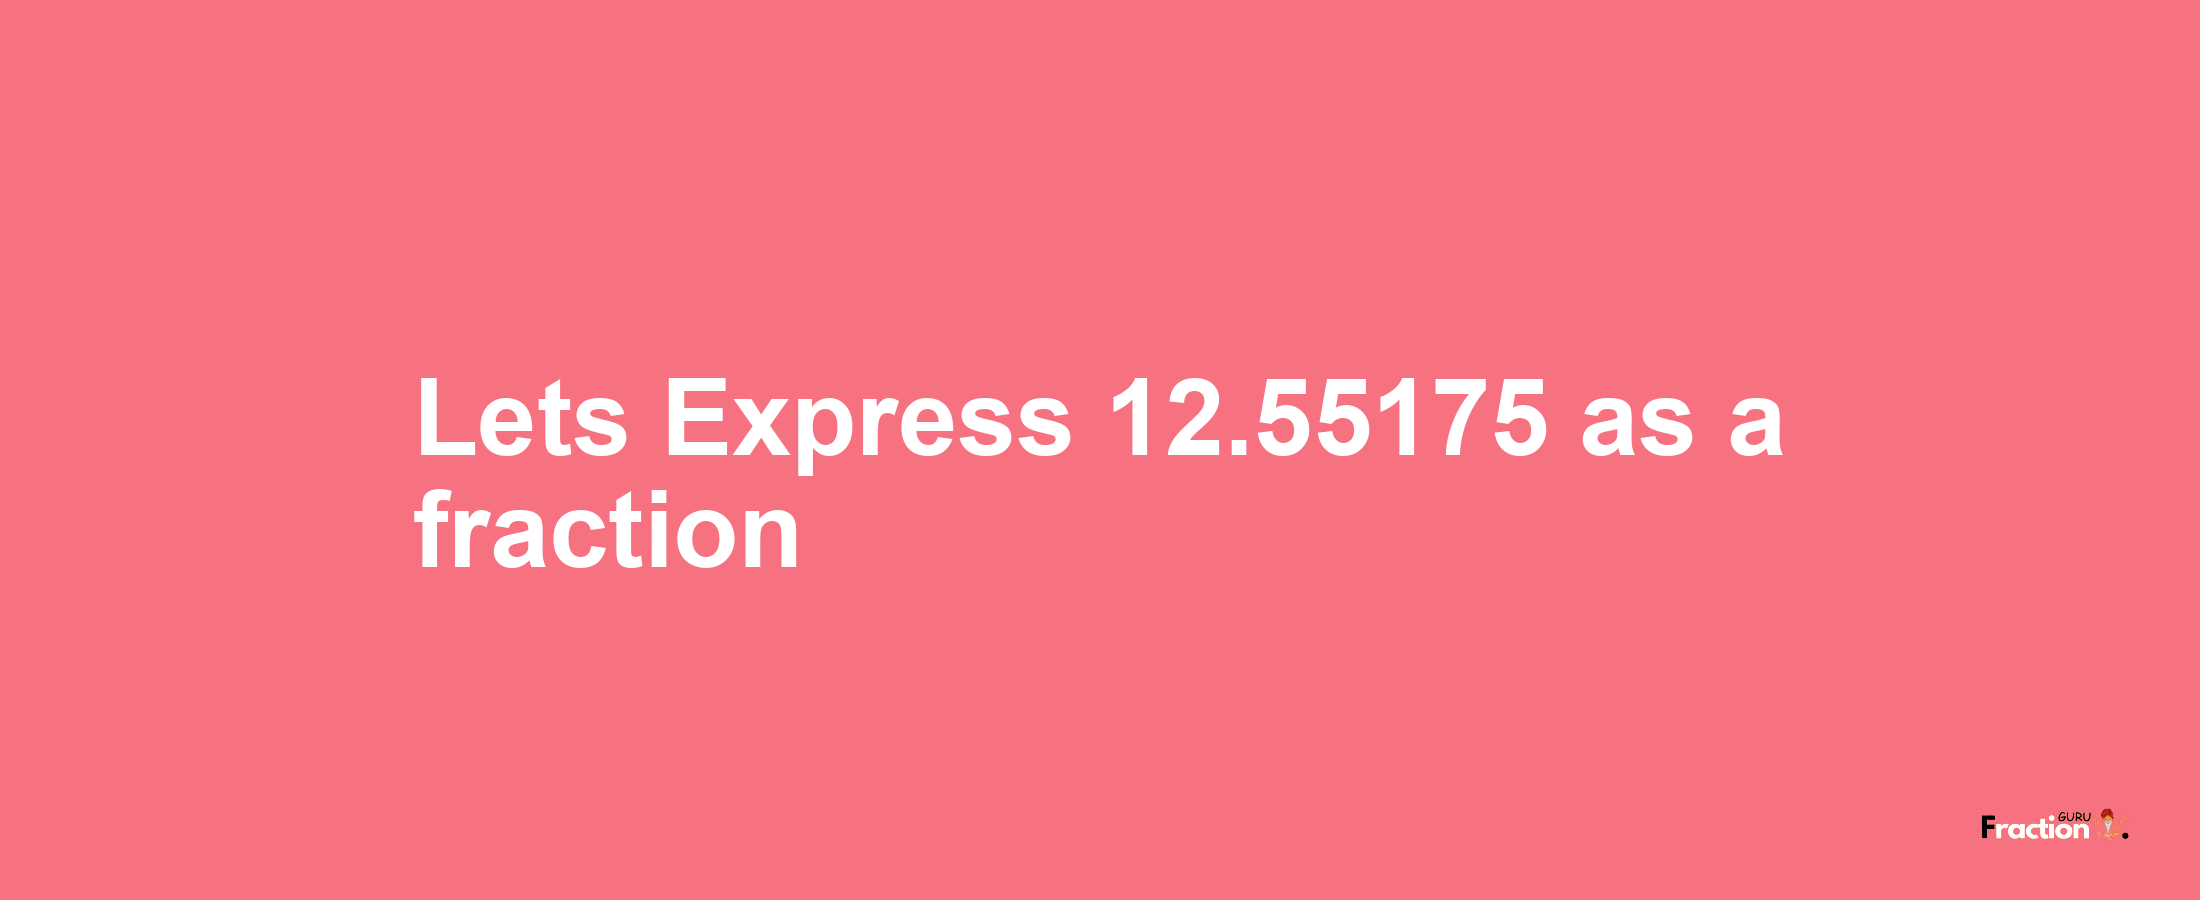 Lets Express 12.55175 as afraction